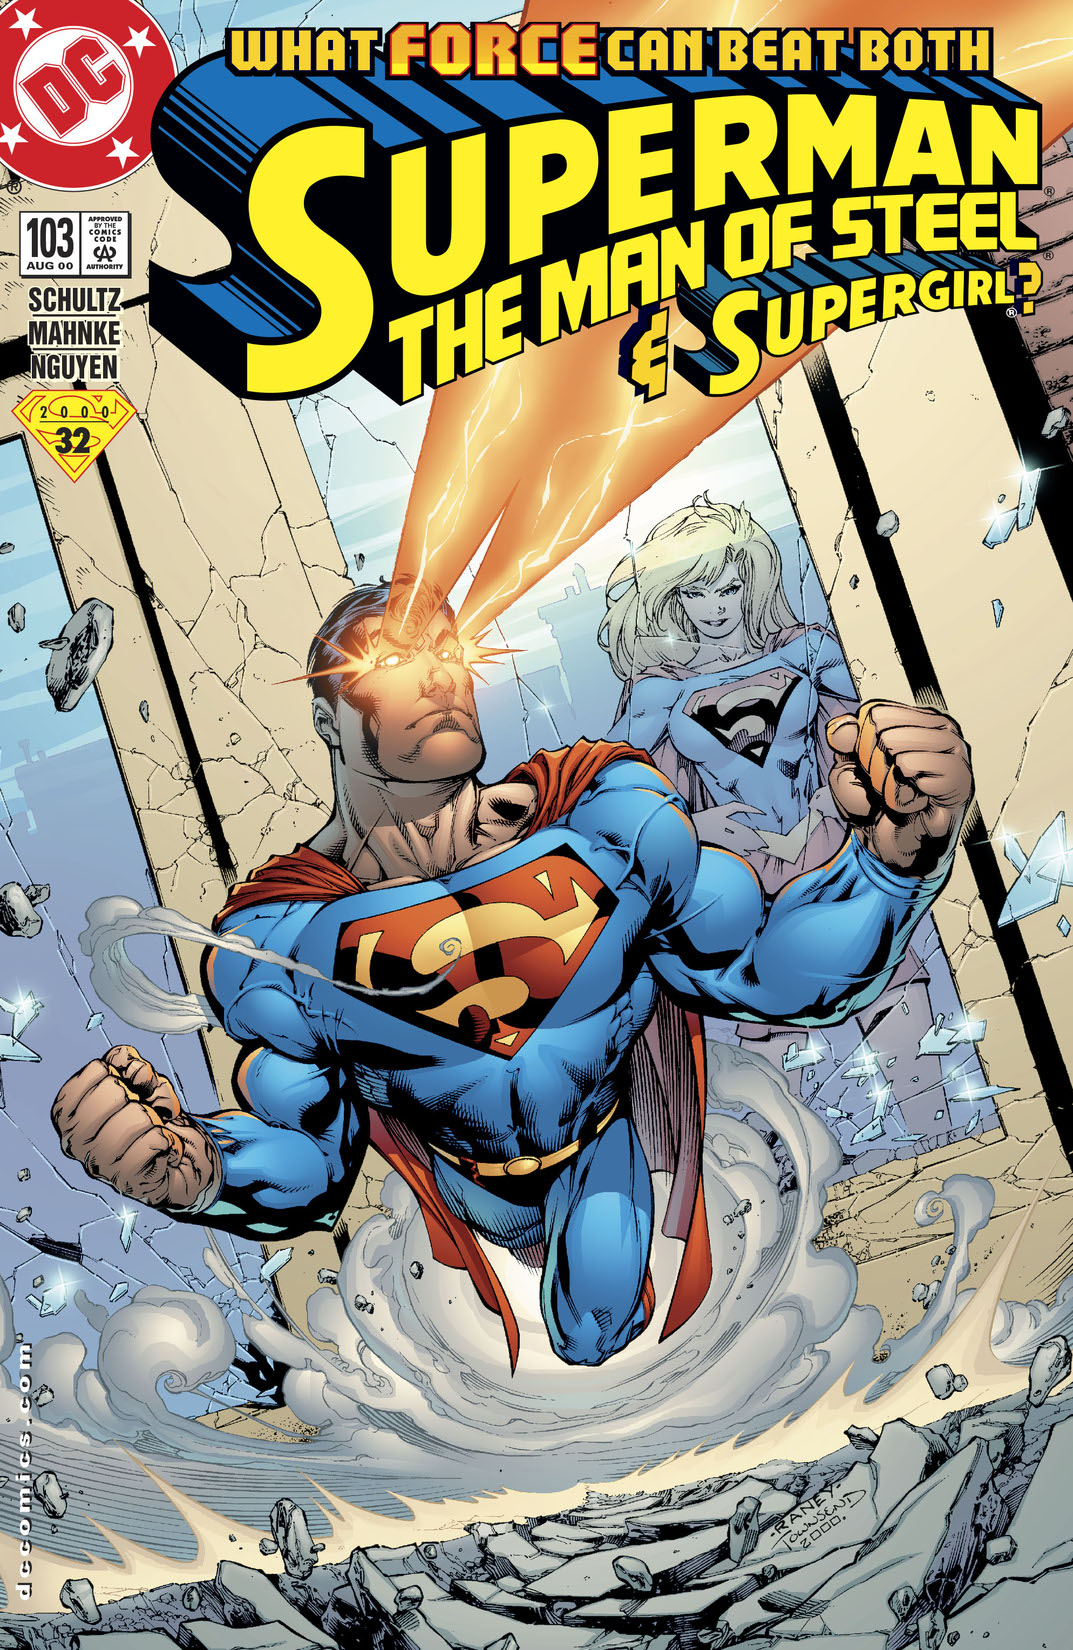 Superman: The Man of Steel #103 preview images